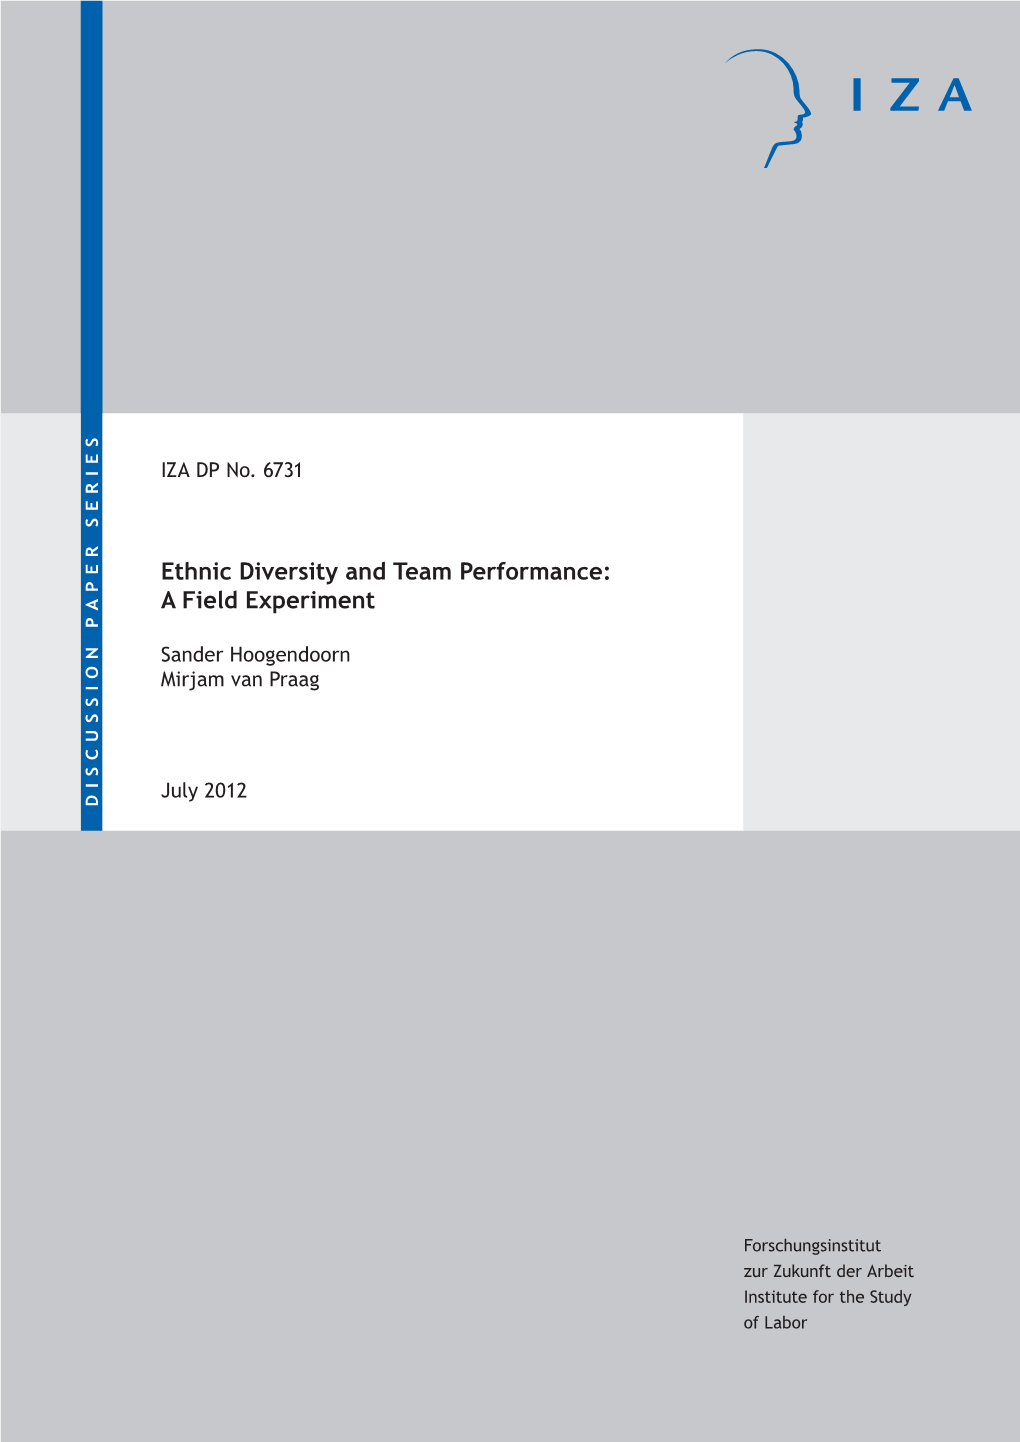 Ethnic Diversity and Team Performance: a Field Experiment